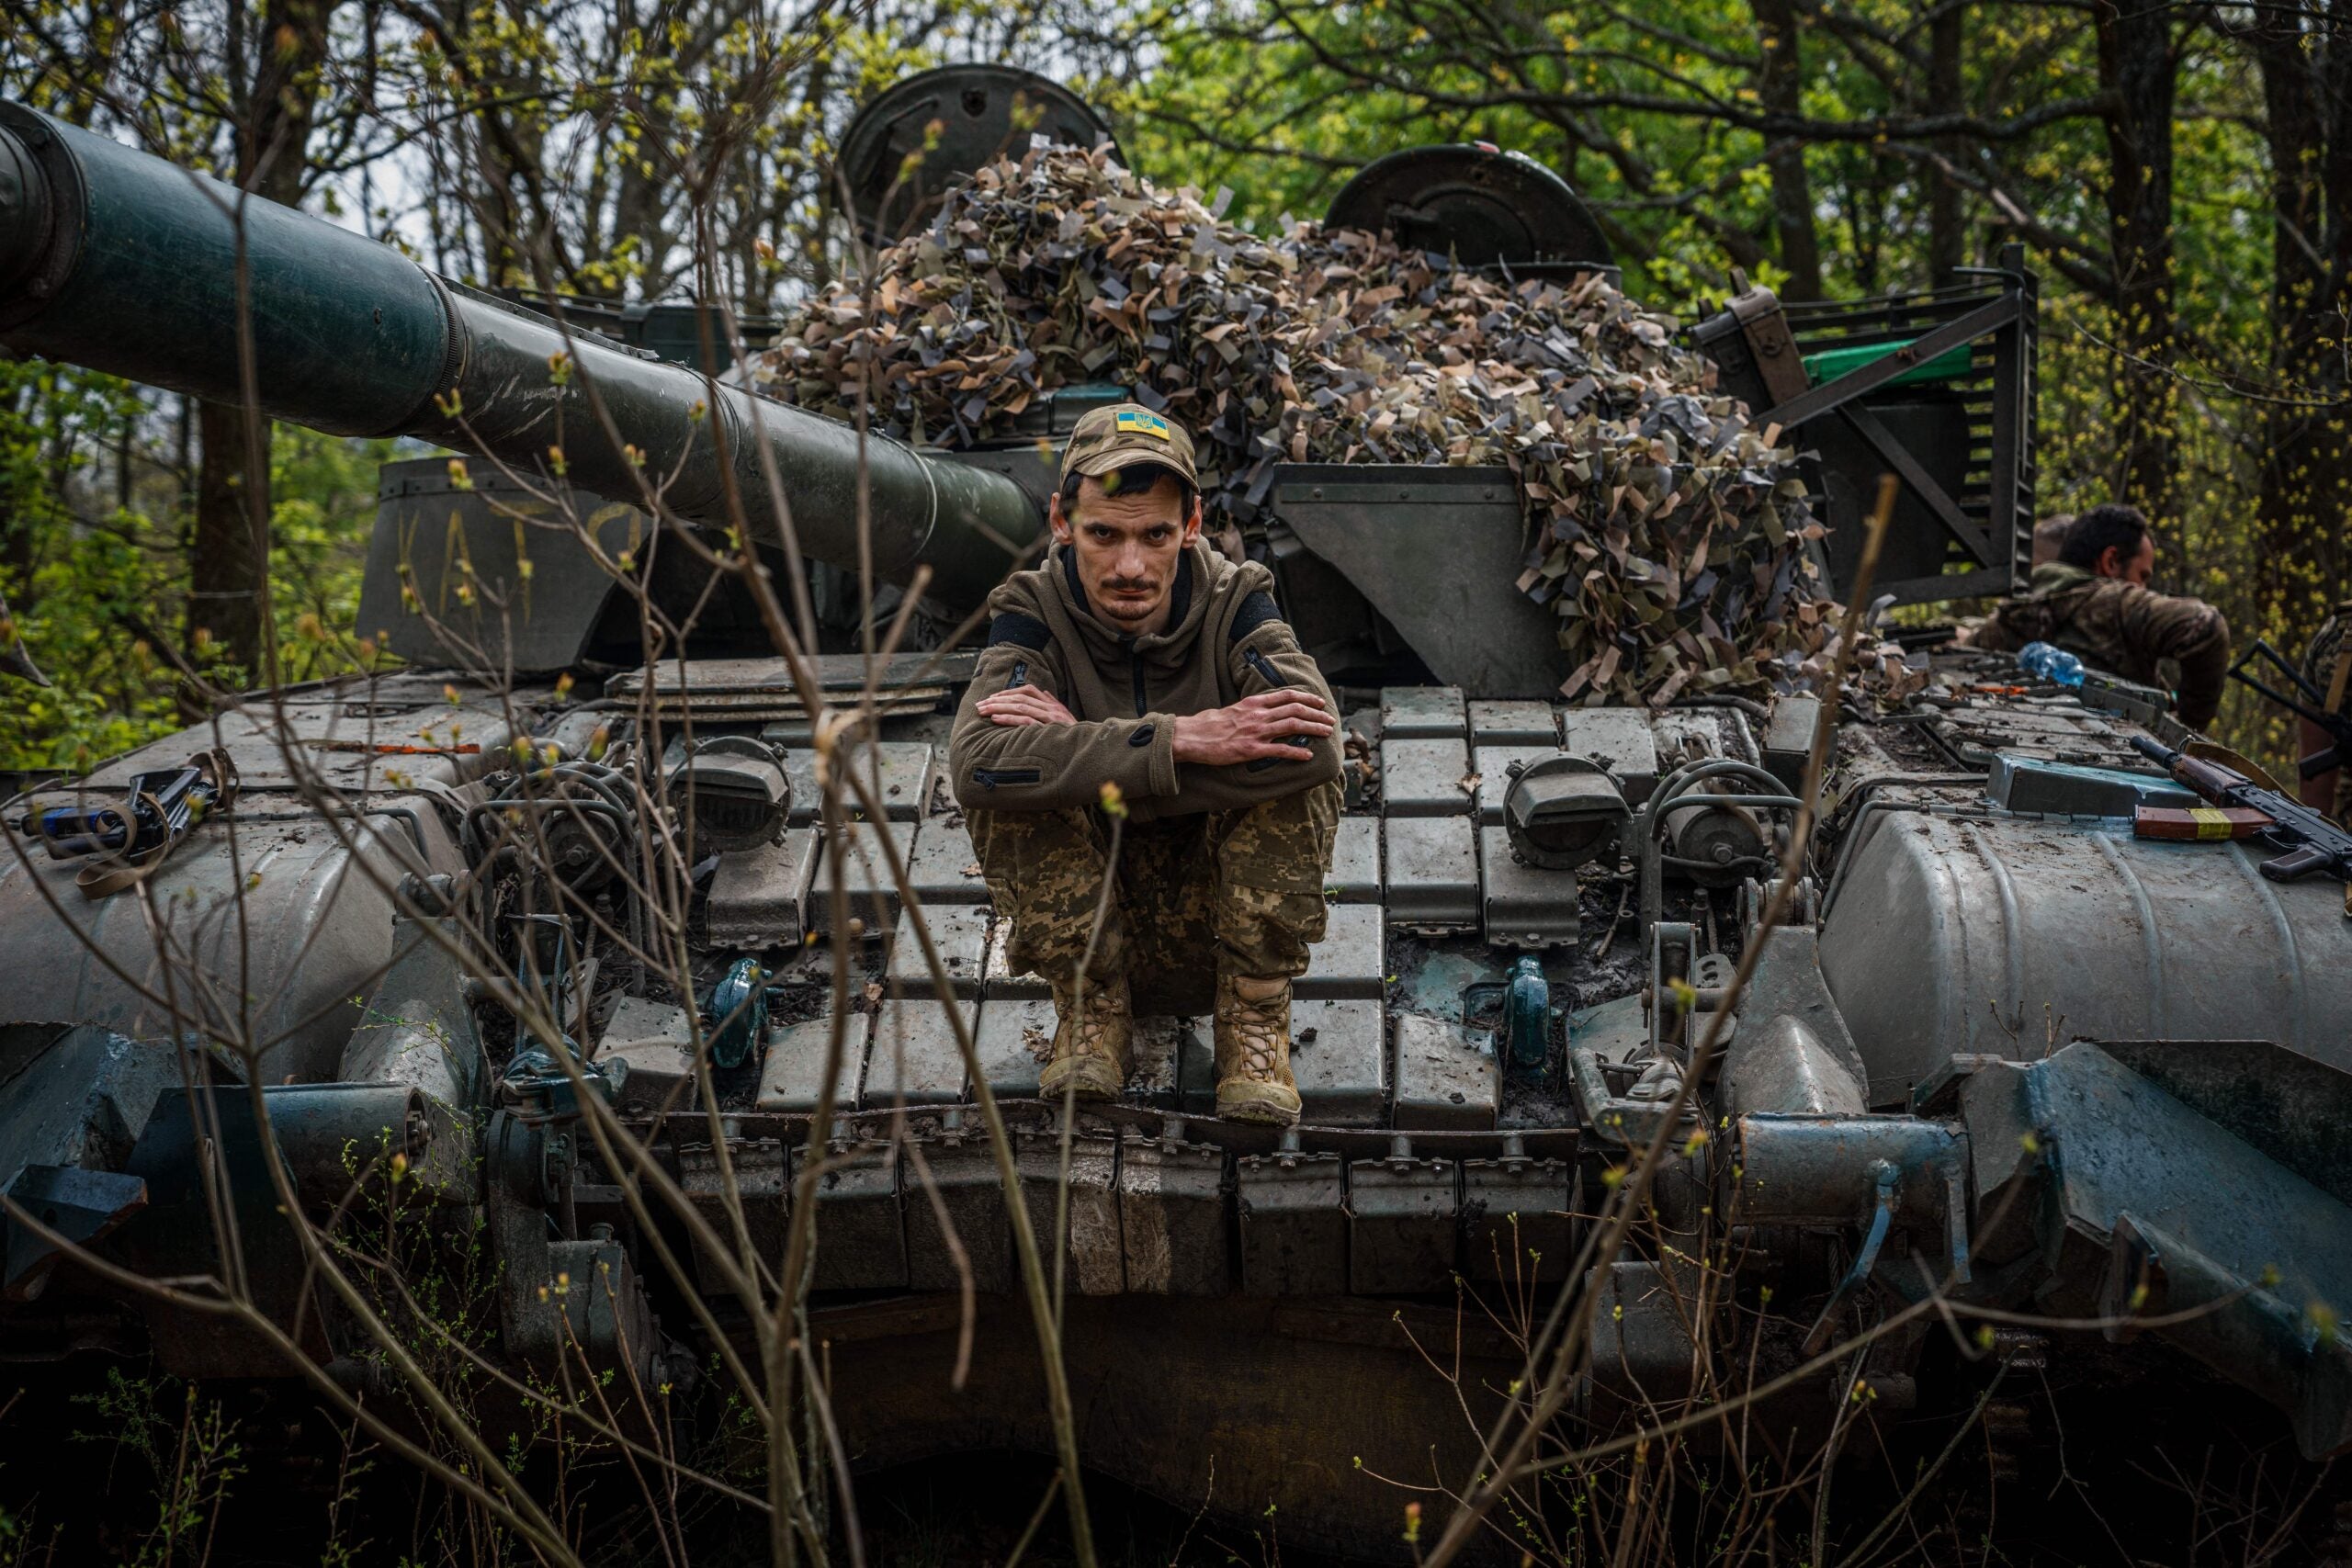 TOPSHOT - A Ukrainian serviceman sits on his tank at position near the frontline city of Bakhmut, Donetsk region on April 29, 2023, amid the Russian invasion of Ukraine. (Photo by Dimitar DILKOFF / AFP) (Photo by DIMITAR DILKOFF/AFP via Getty Images)